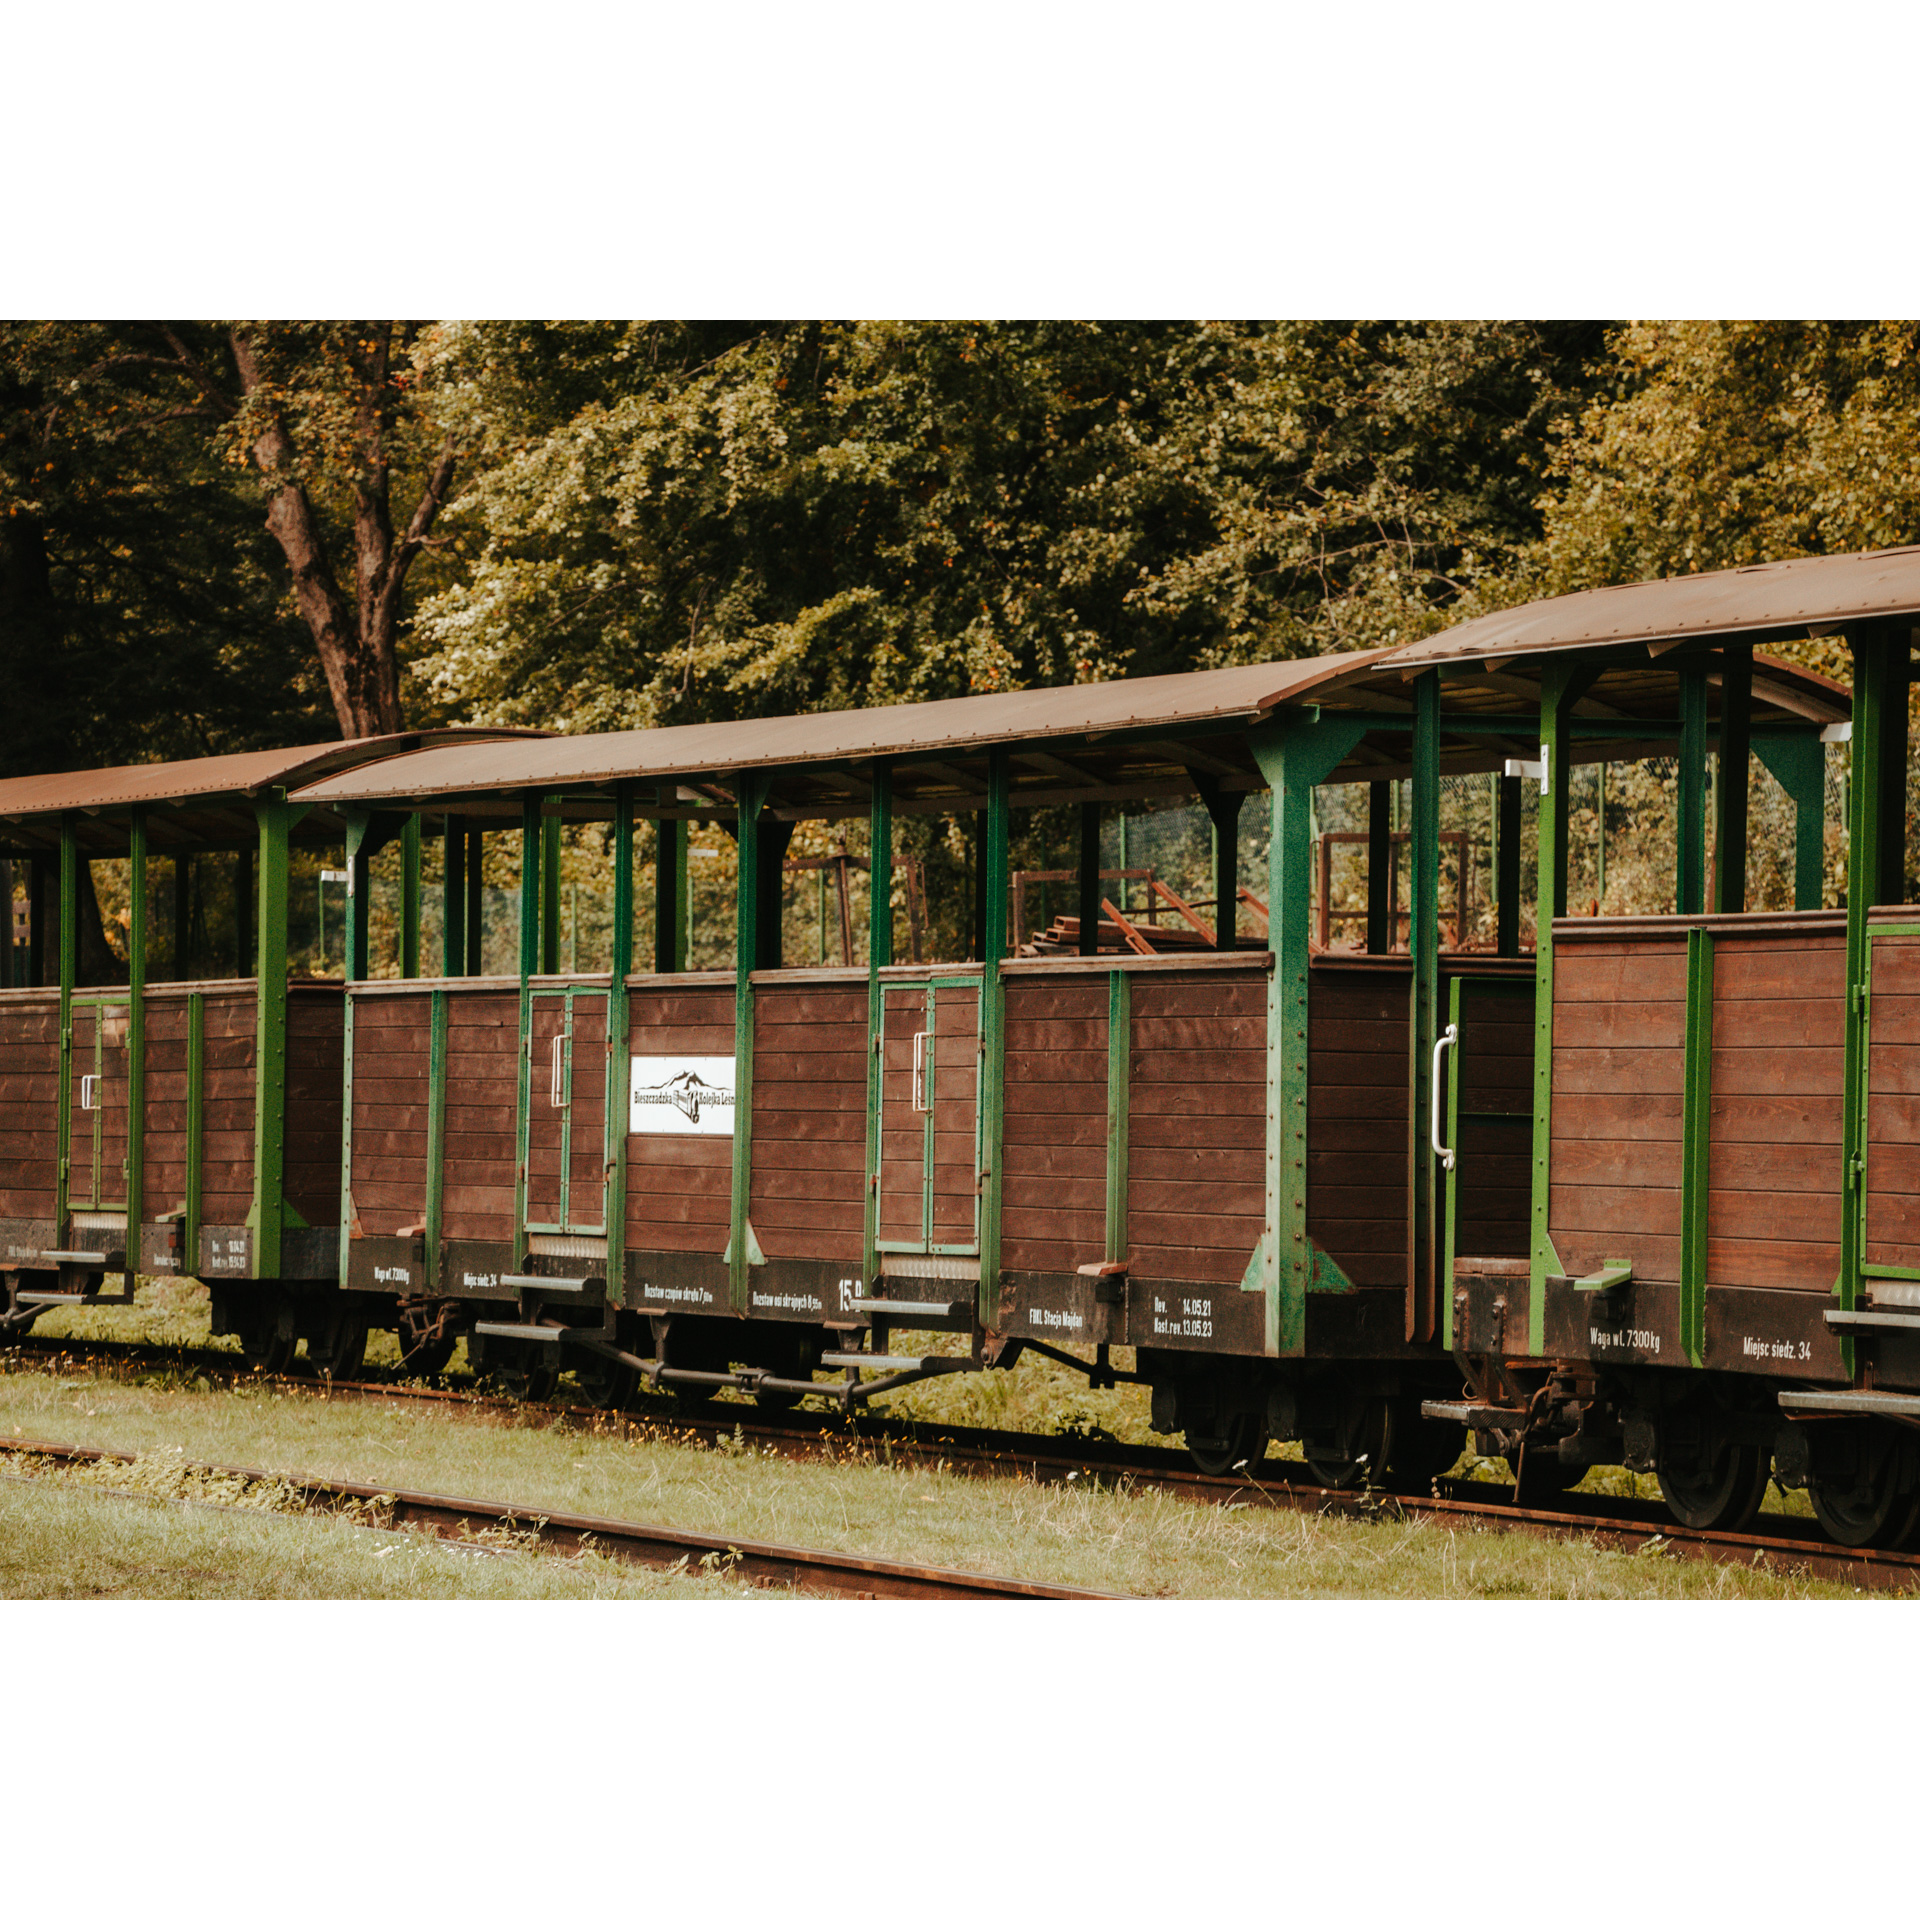 Wooden, brown and green wagons on railway rails